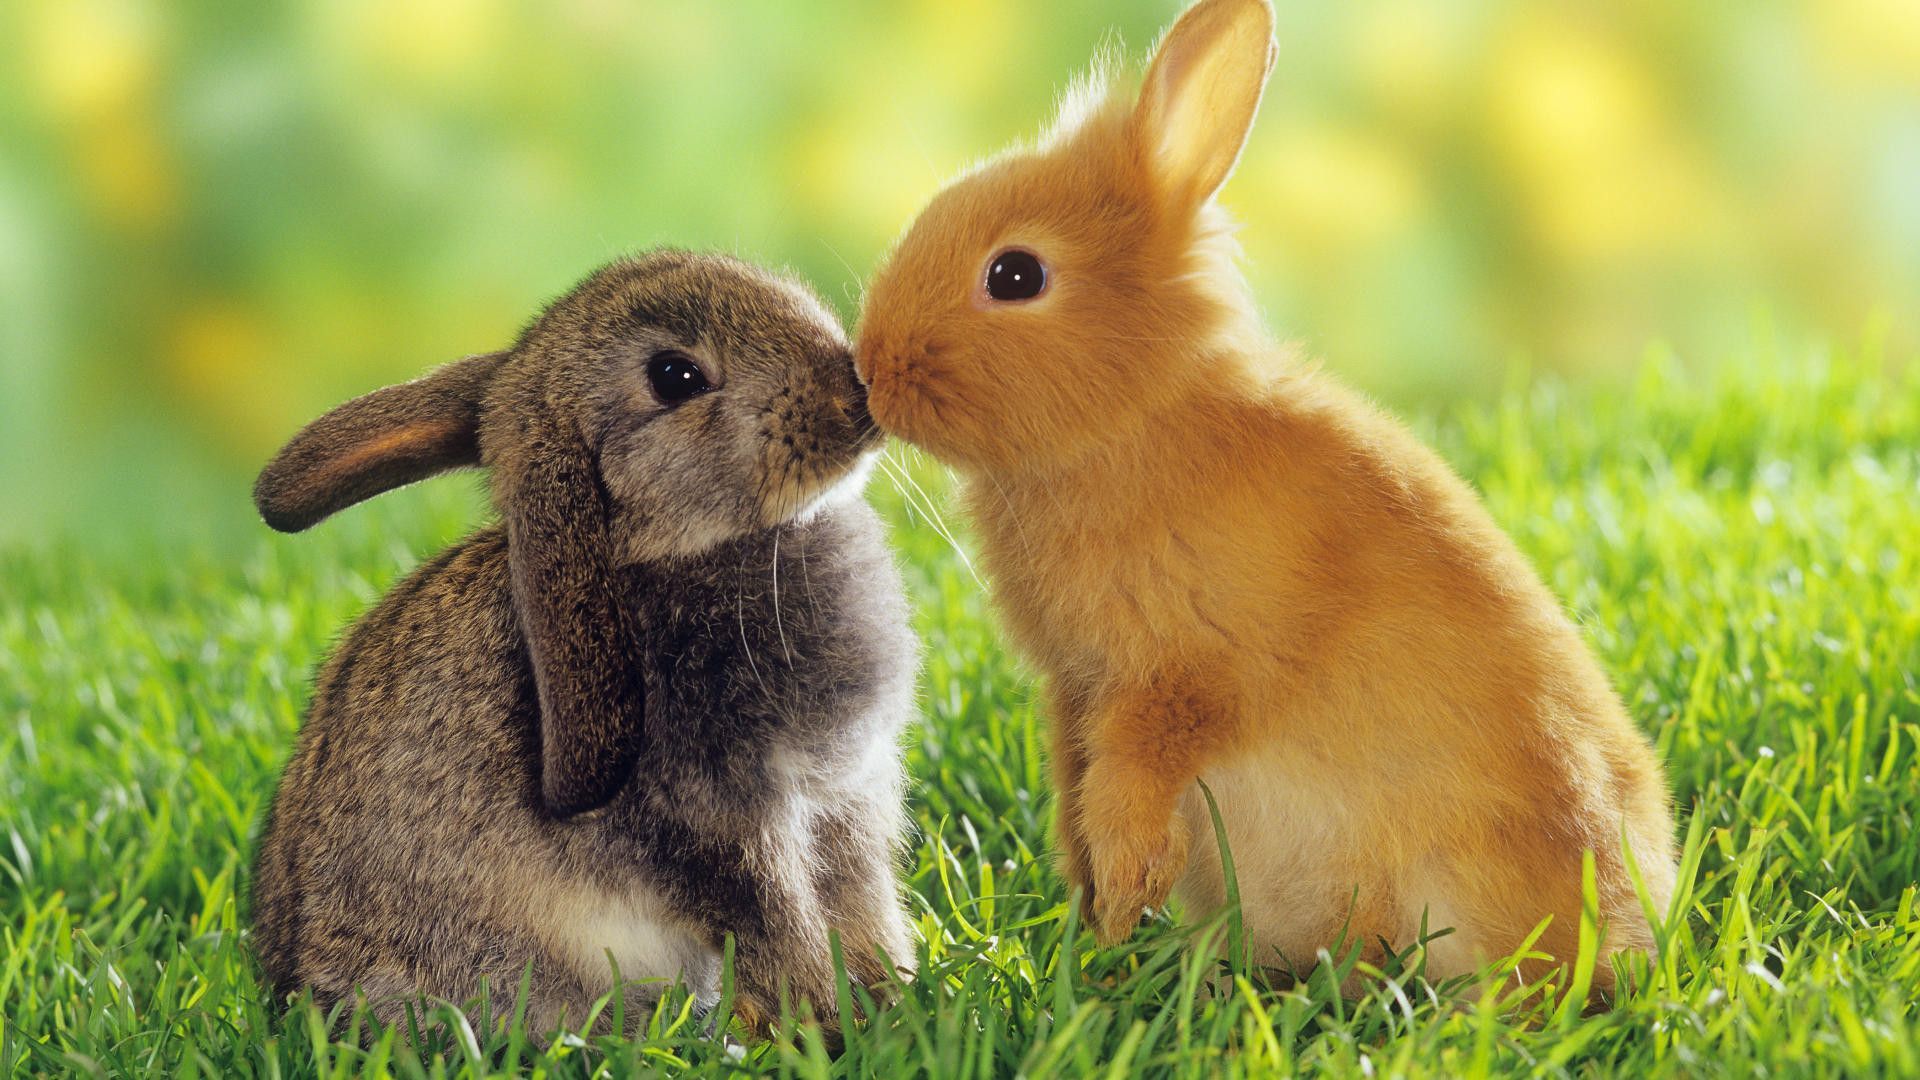 Rabbit Wallpapers HD Pictures | One HD Wallpaper Pictures ...